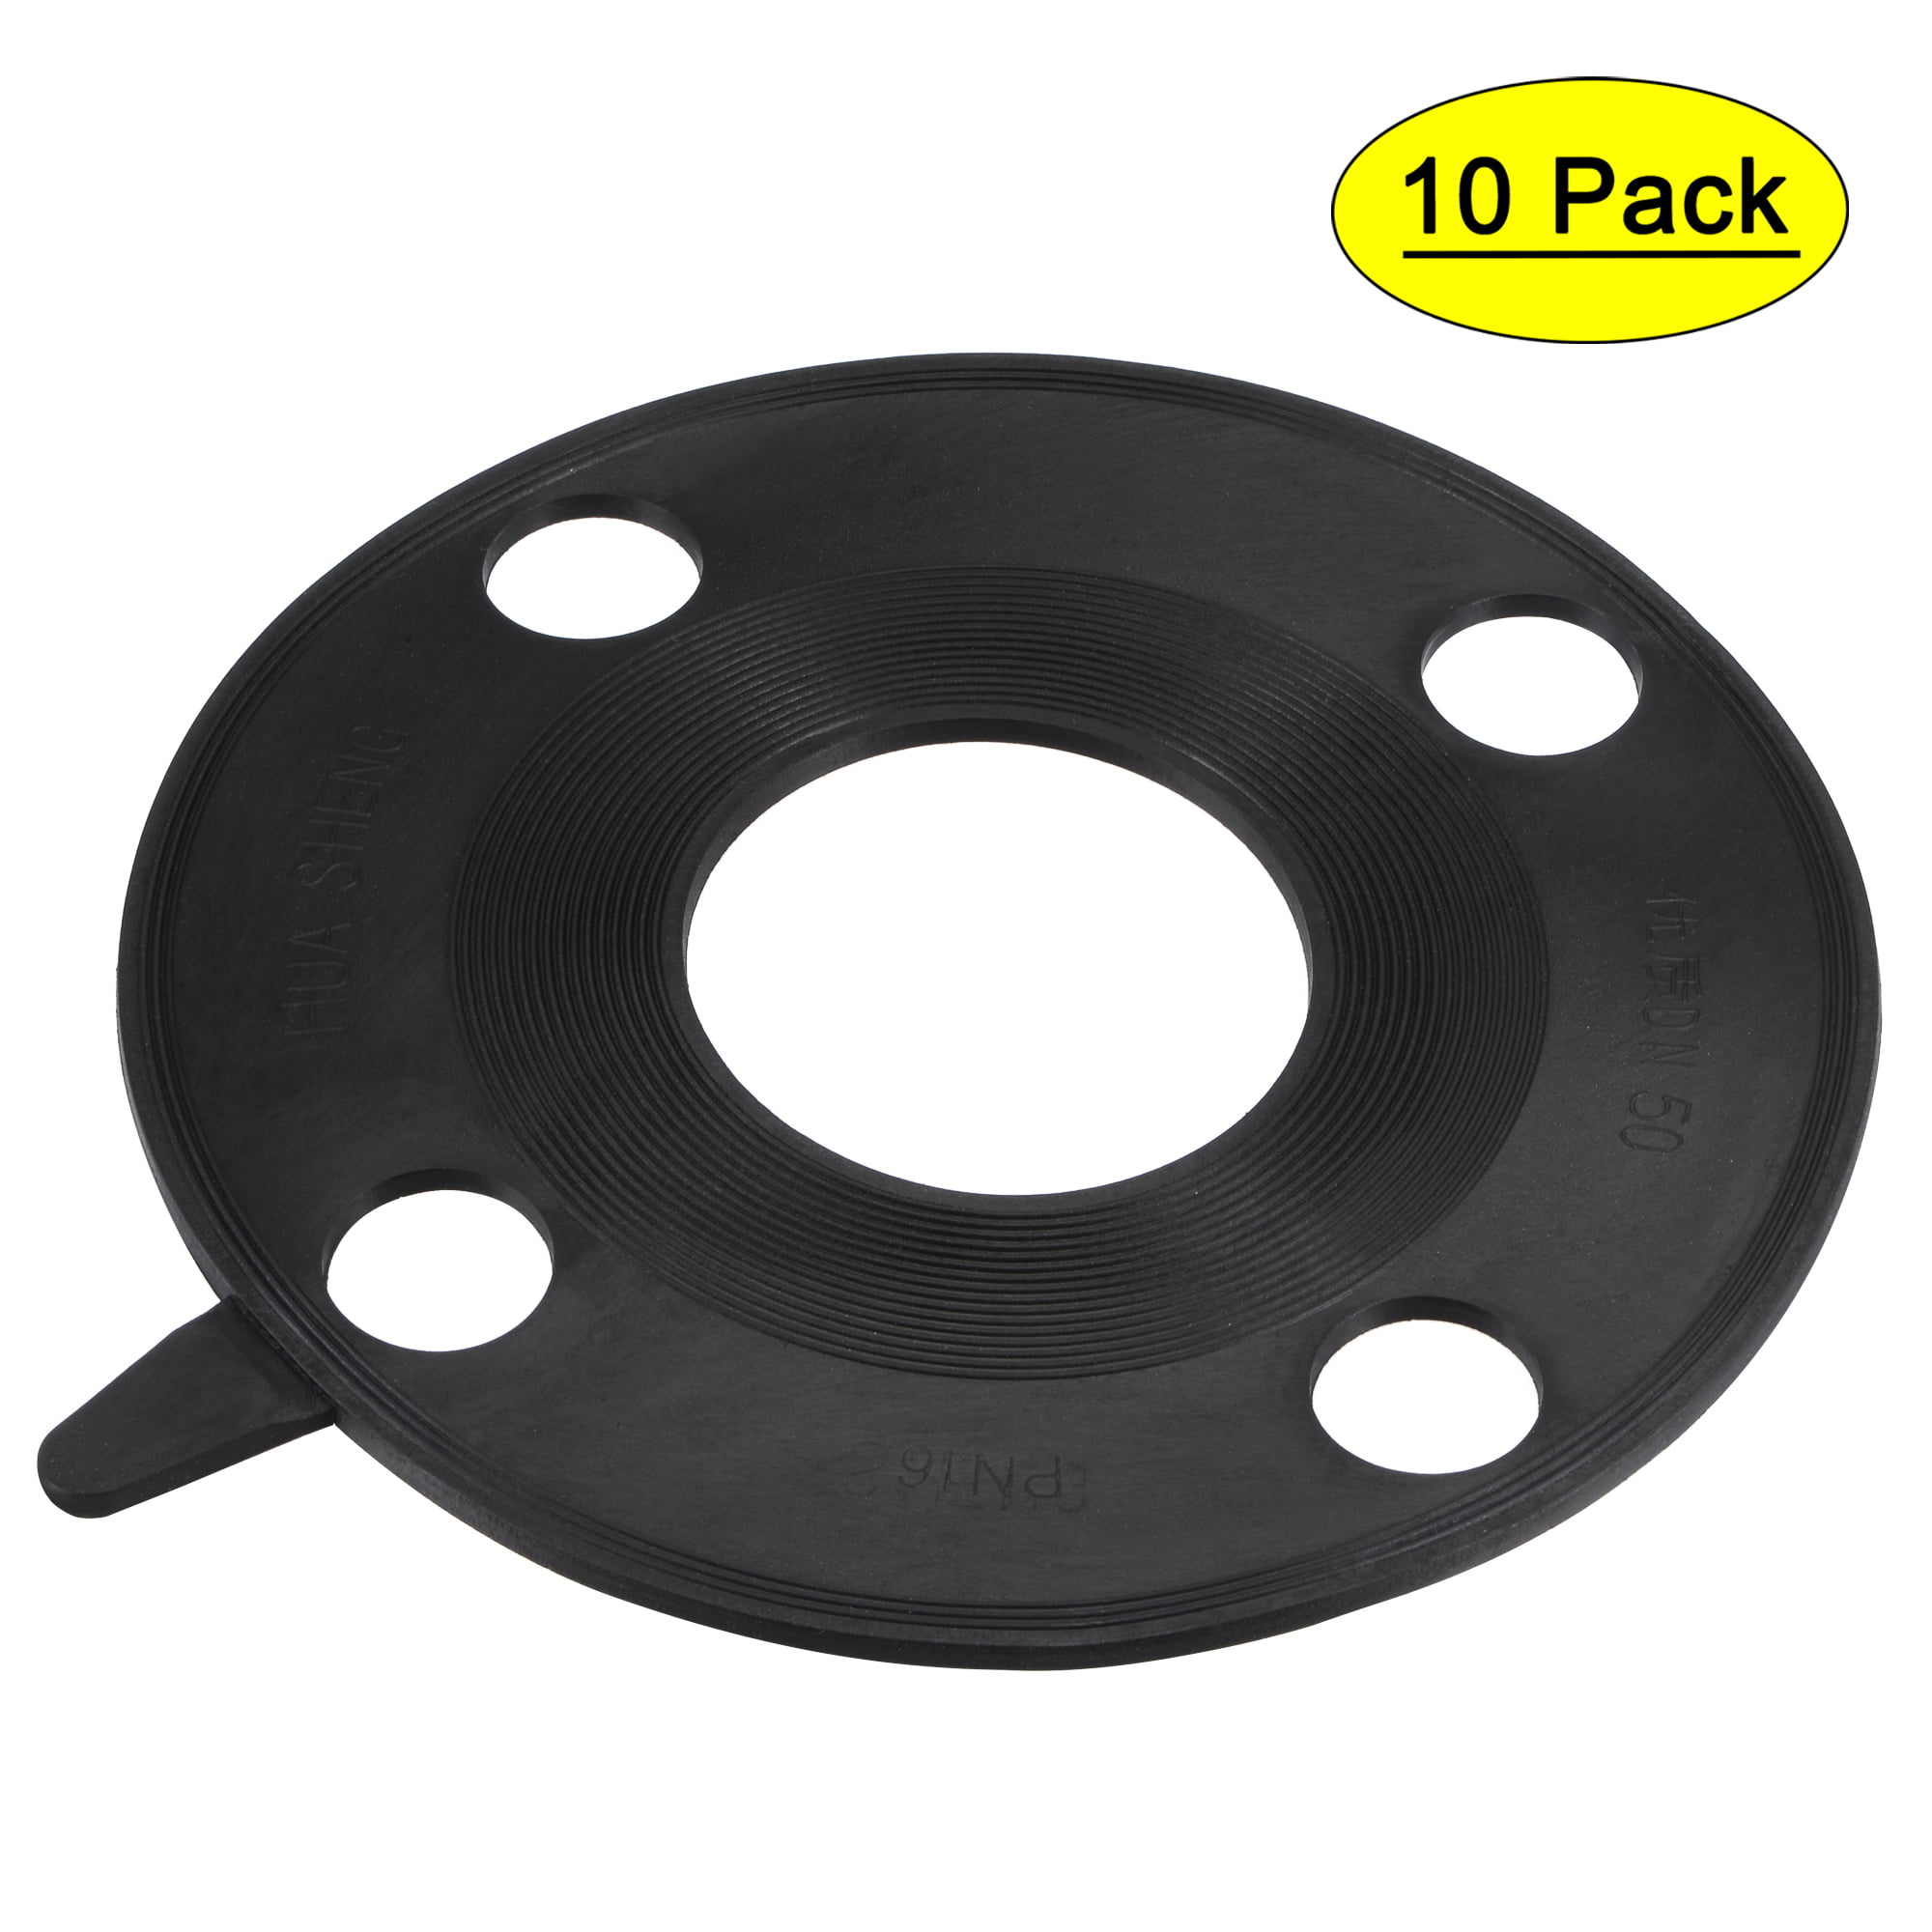 RUBBER BUFFER PADS BLACK NEW TOILET SEAT FURNITURE 7/8" 22MM QTY 50 